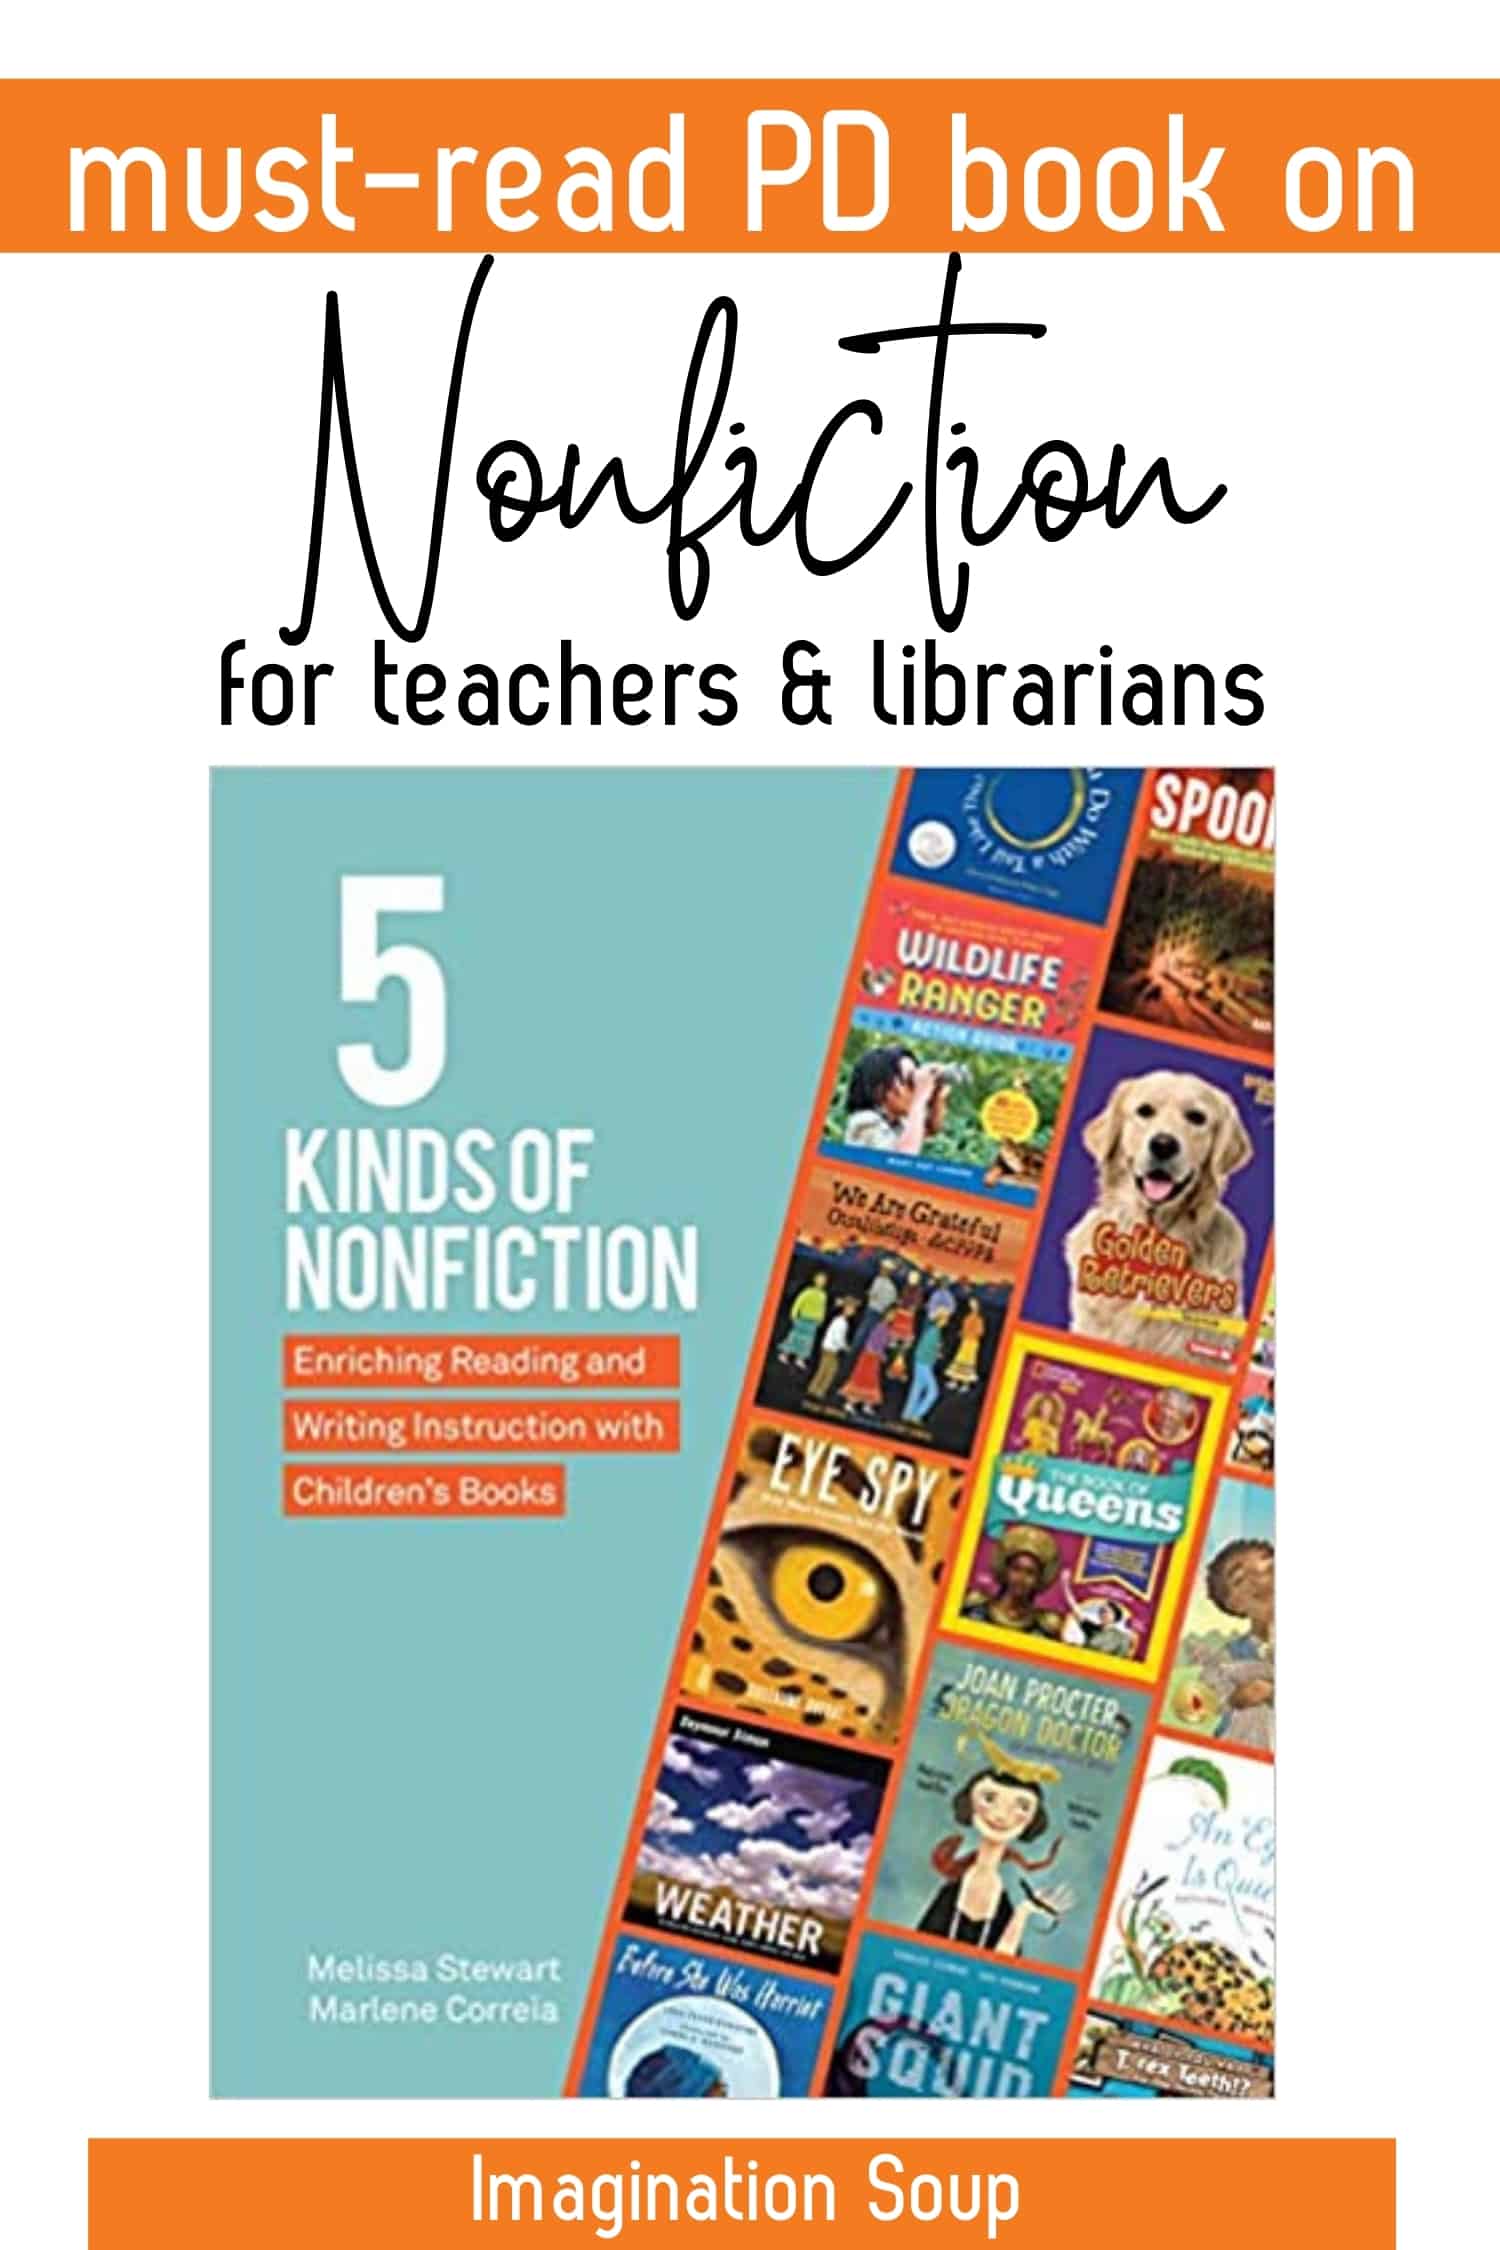 5 Kinds of Nonfiction by Melissa Stewart & Marlene Correia